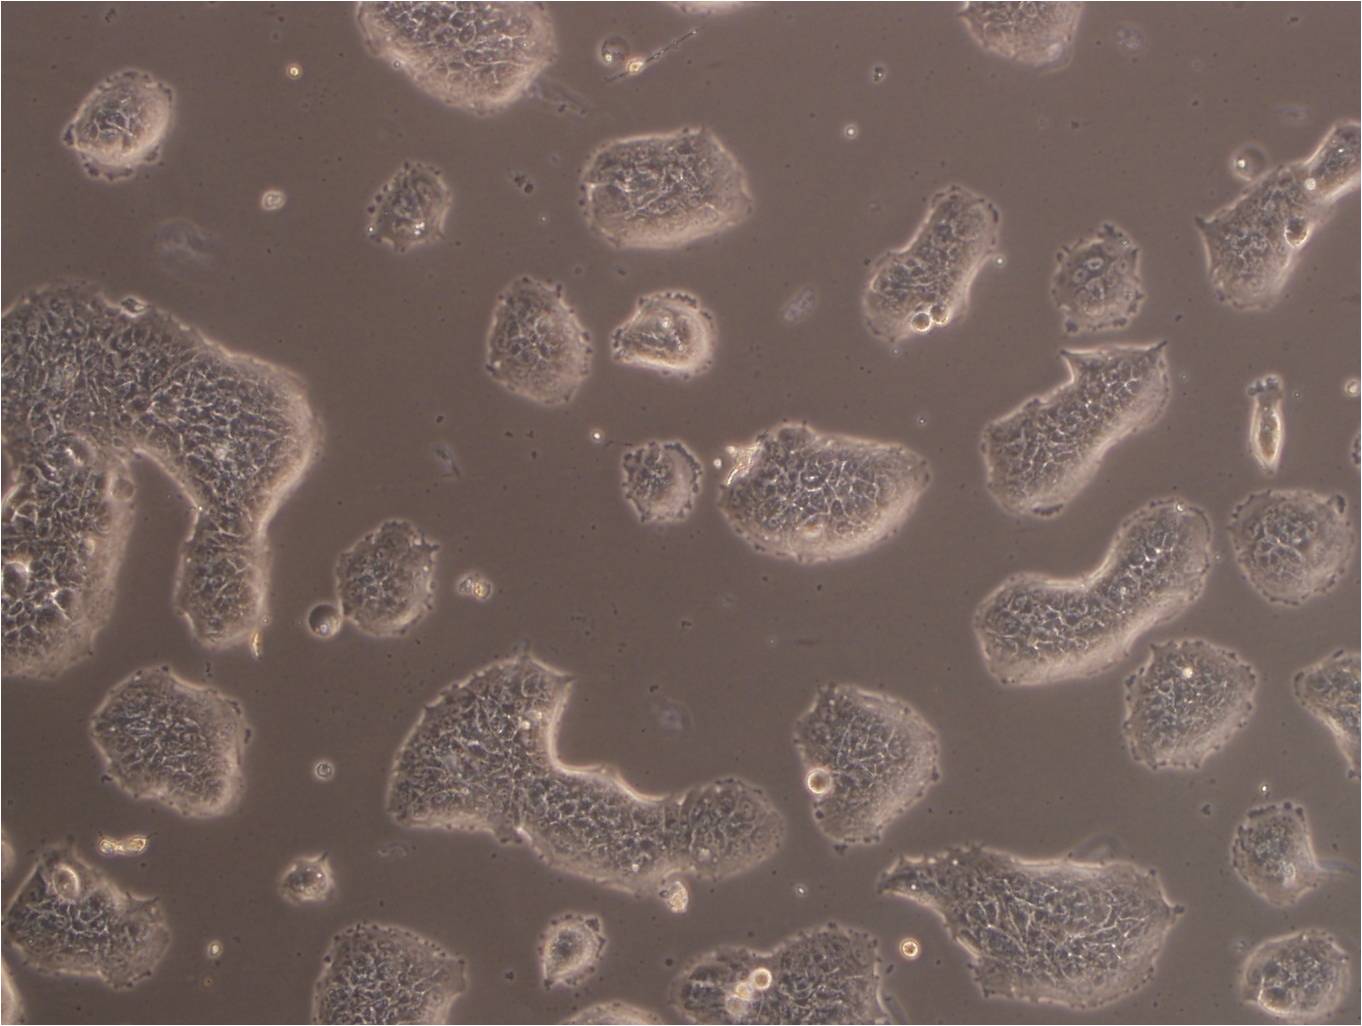 KMS-18 epithelioid cells人浆细胞骨髓瘤细胞系,KMS-18 epithelioid cells